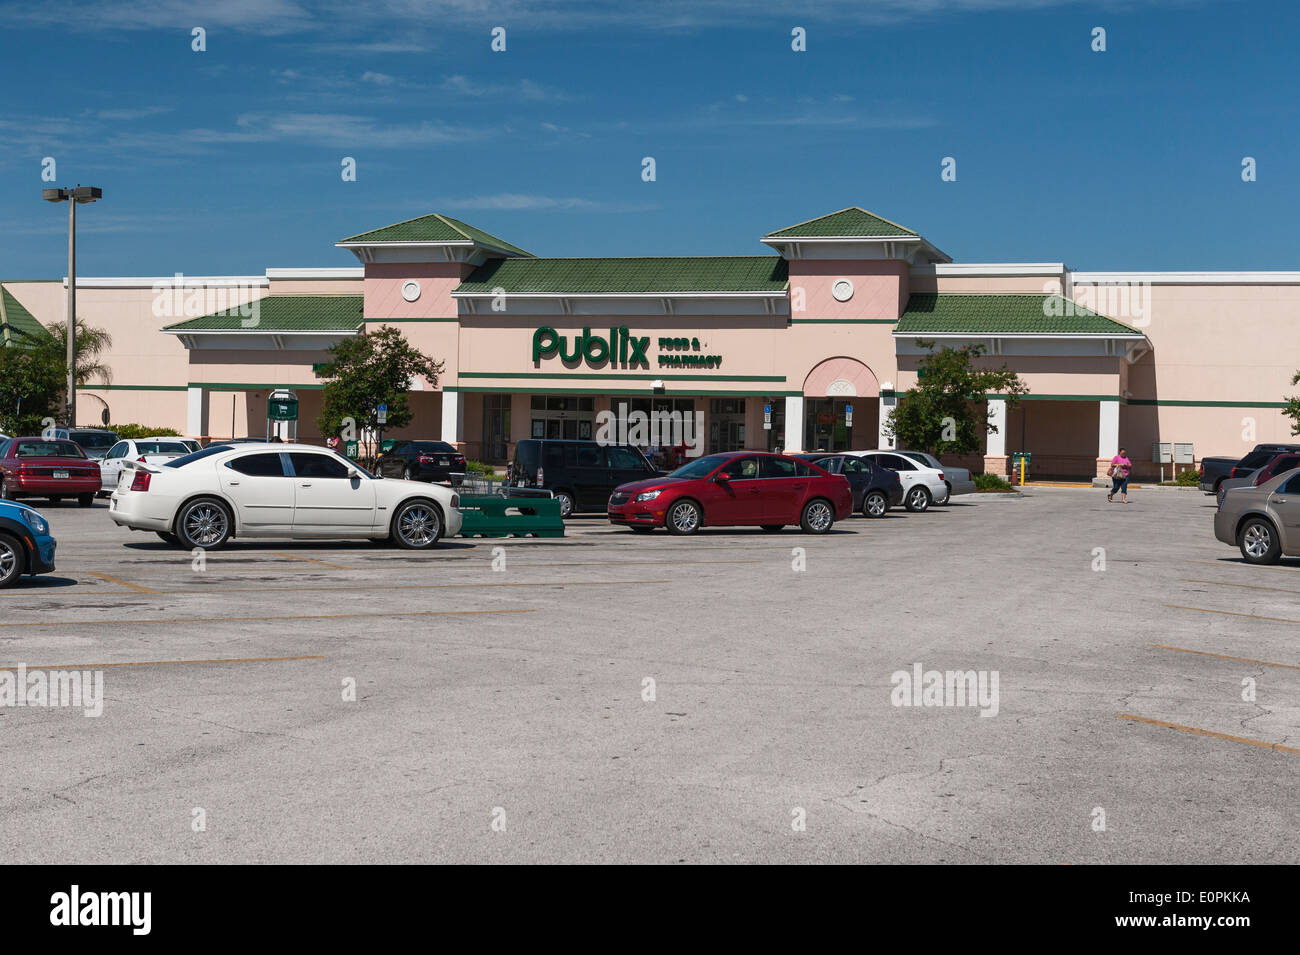 Publix Food Super Market Grocery Chain located in Leesburg, Florida USA Stock Photo